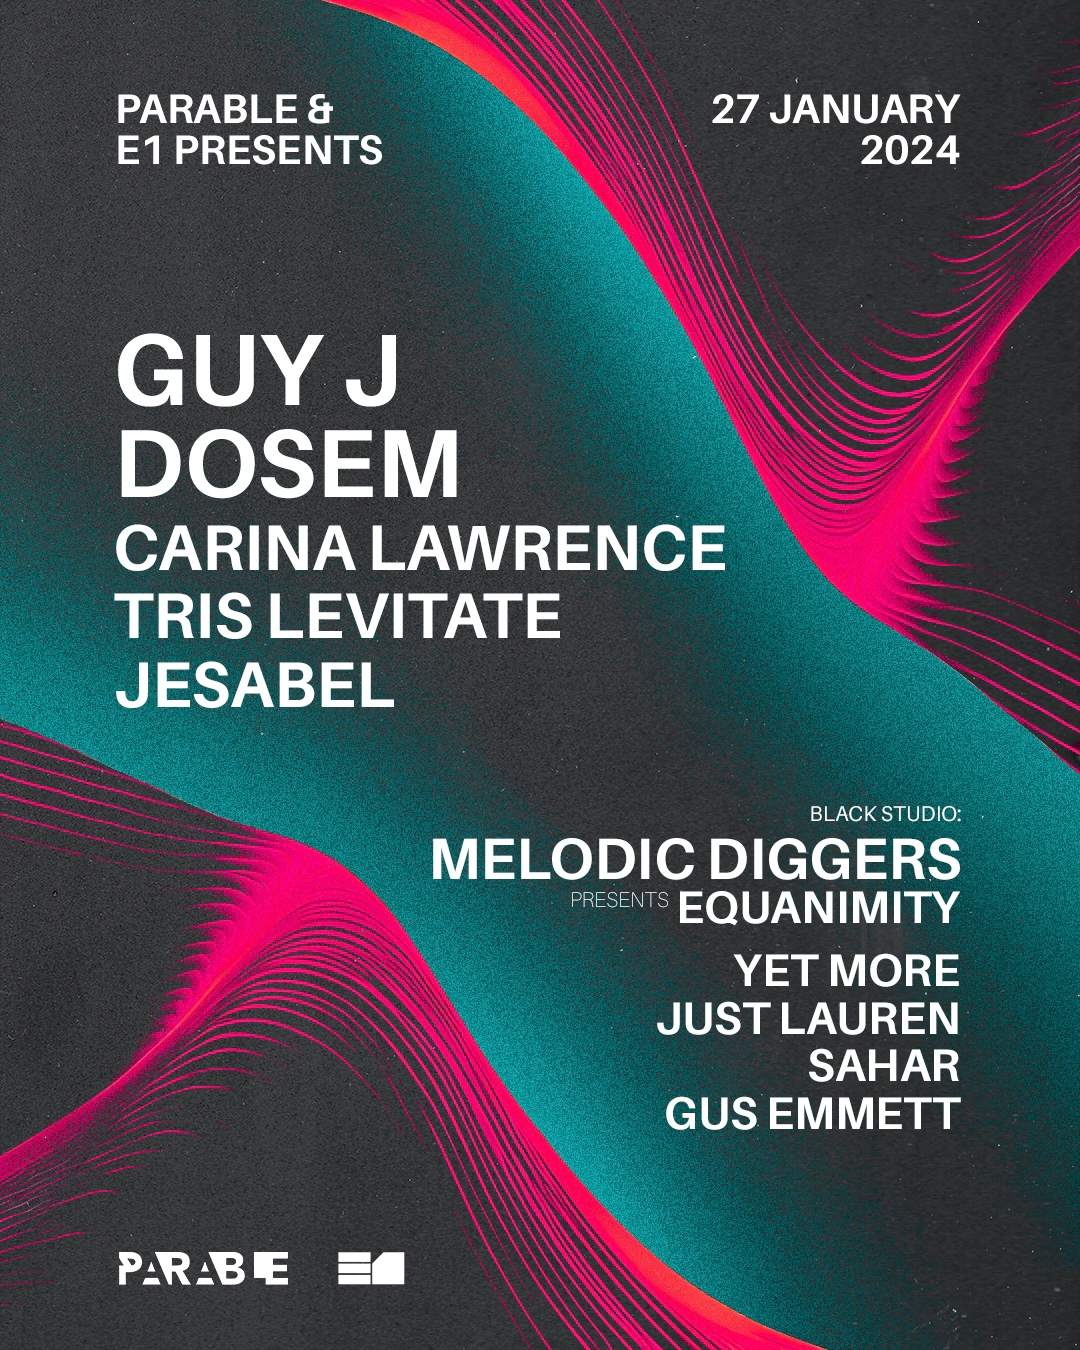 Parable presents: Guy J, Dosem, Melodic Diggers w Yet More, Sahar, Just Lauren - フライヤー表